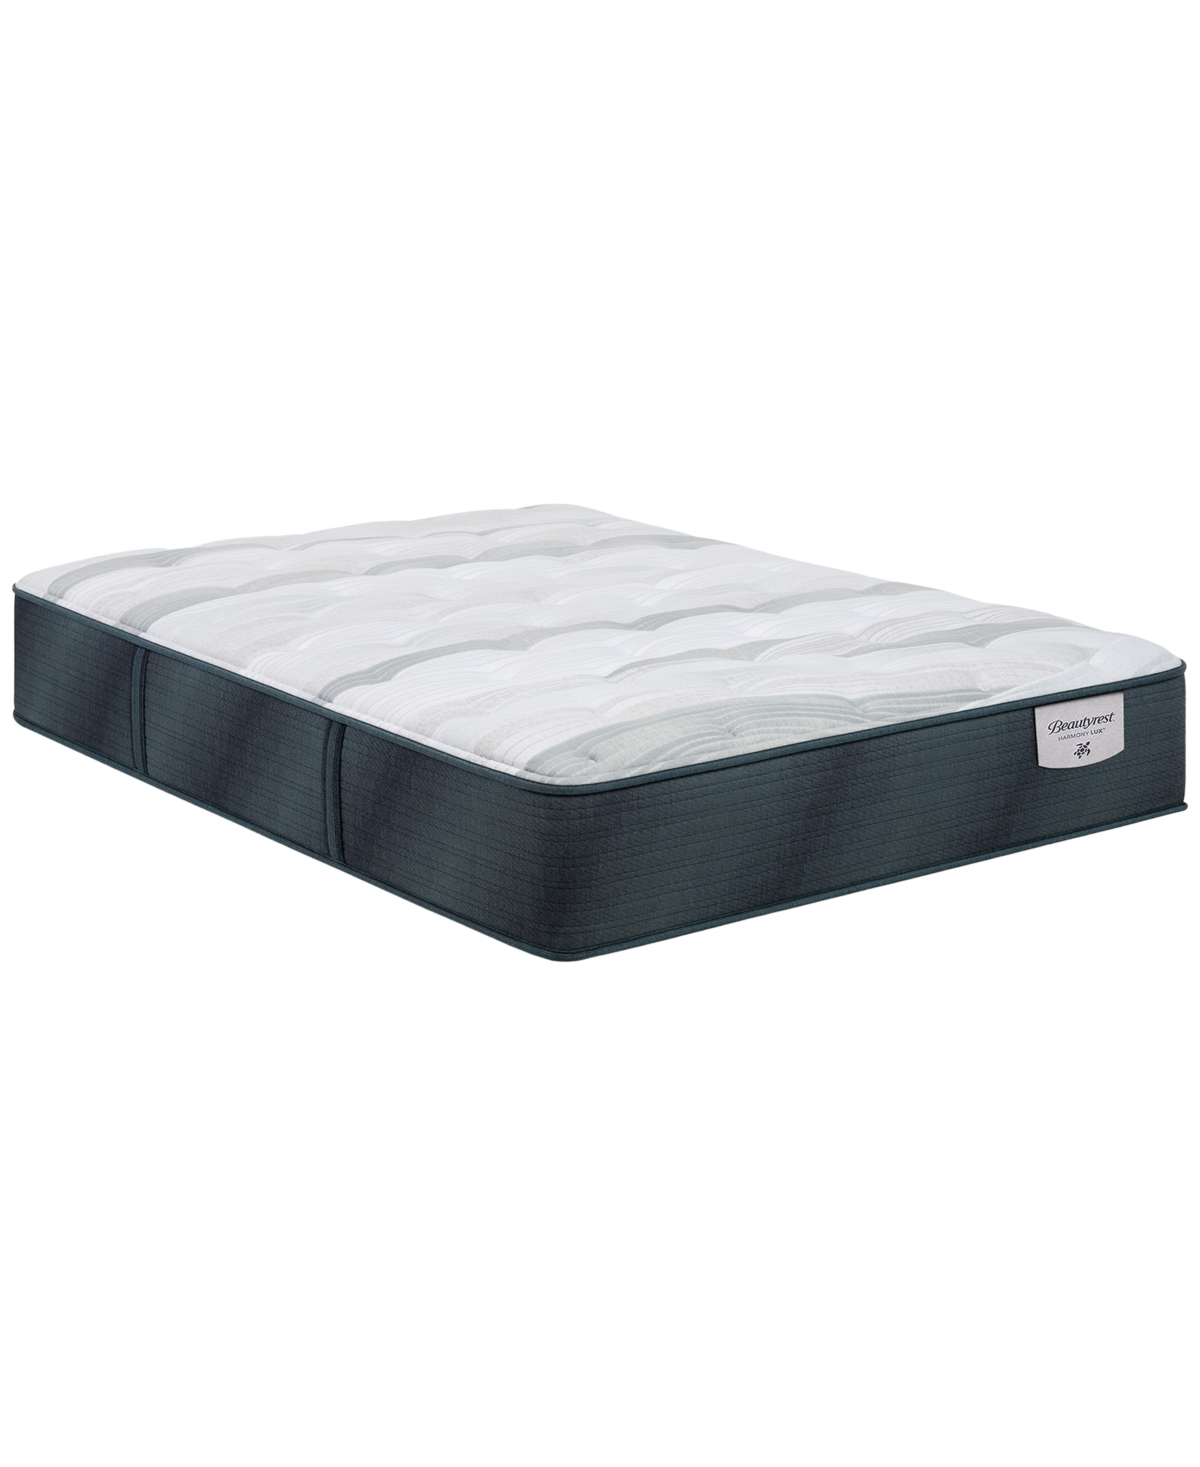 Beautyrest Harmony Lux Anchor Island 13.5" Plush Mattress Set In No Color